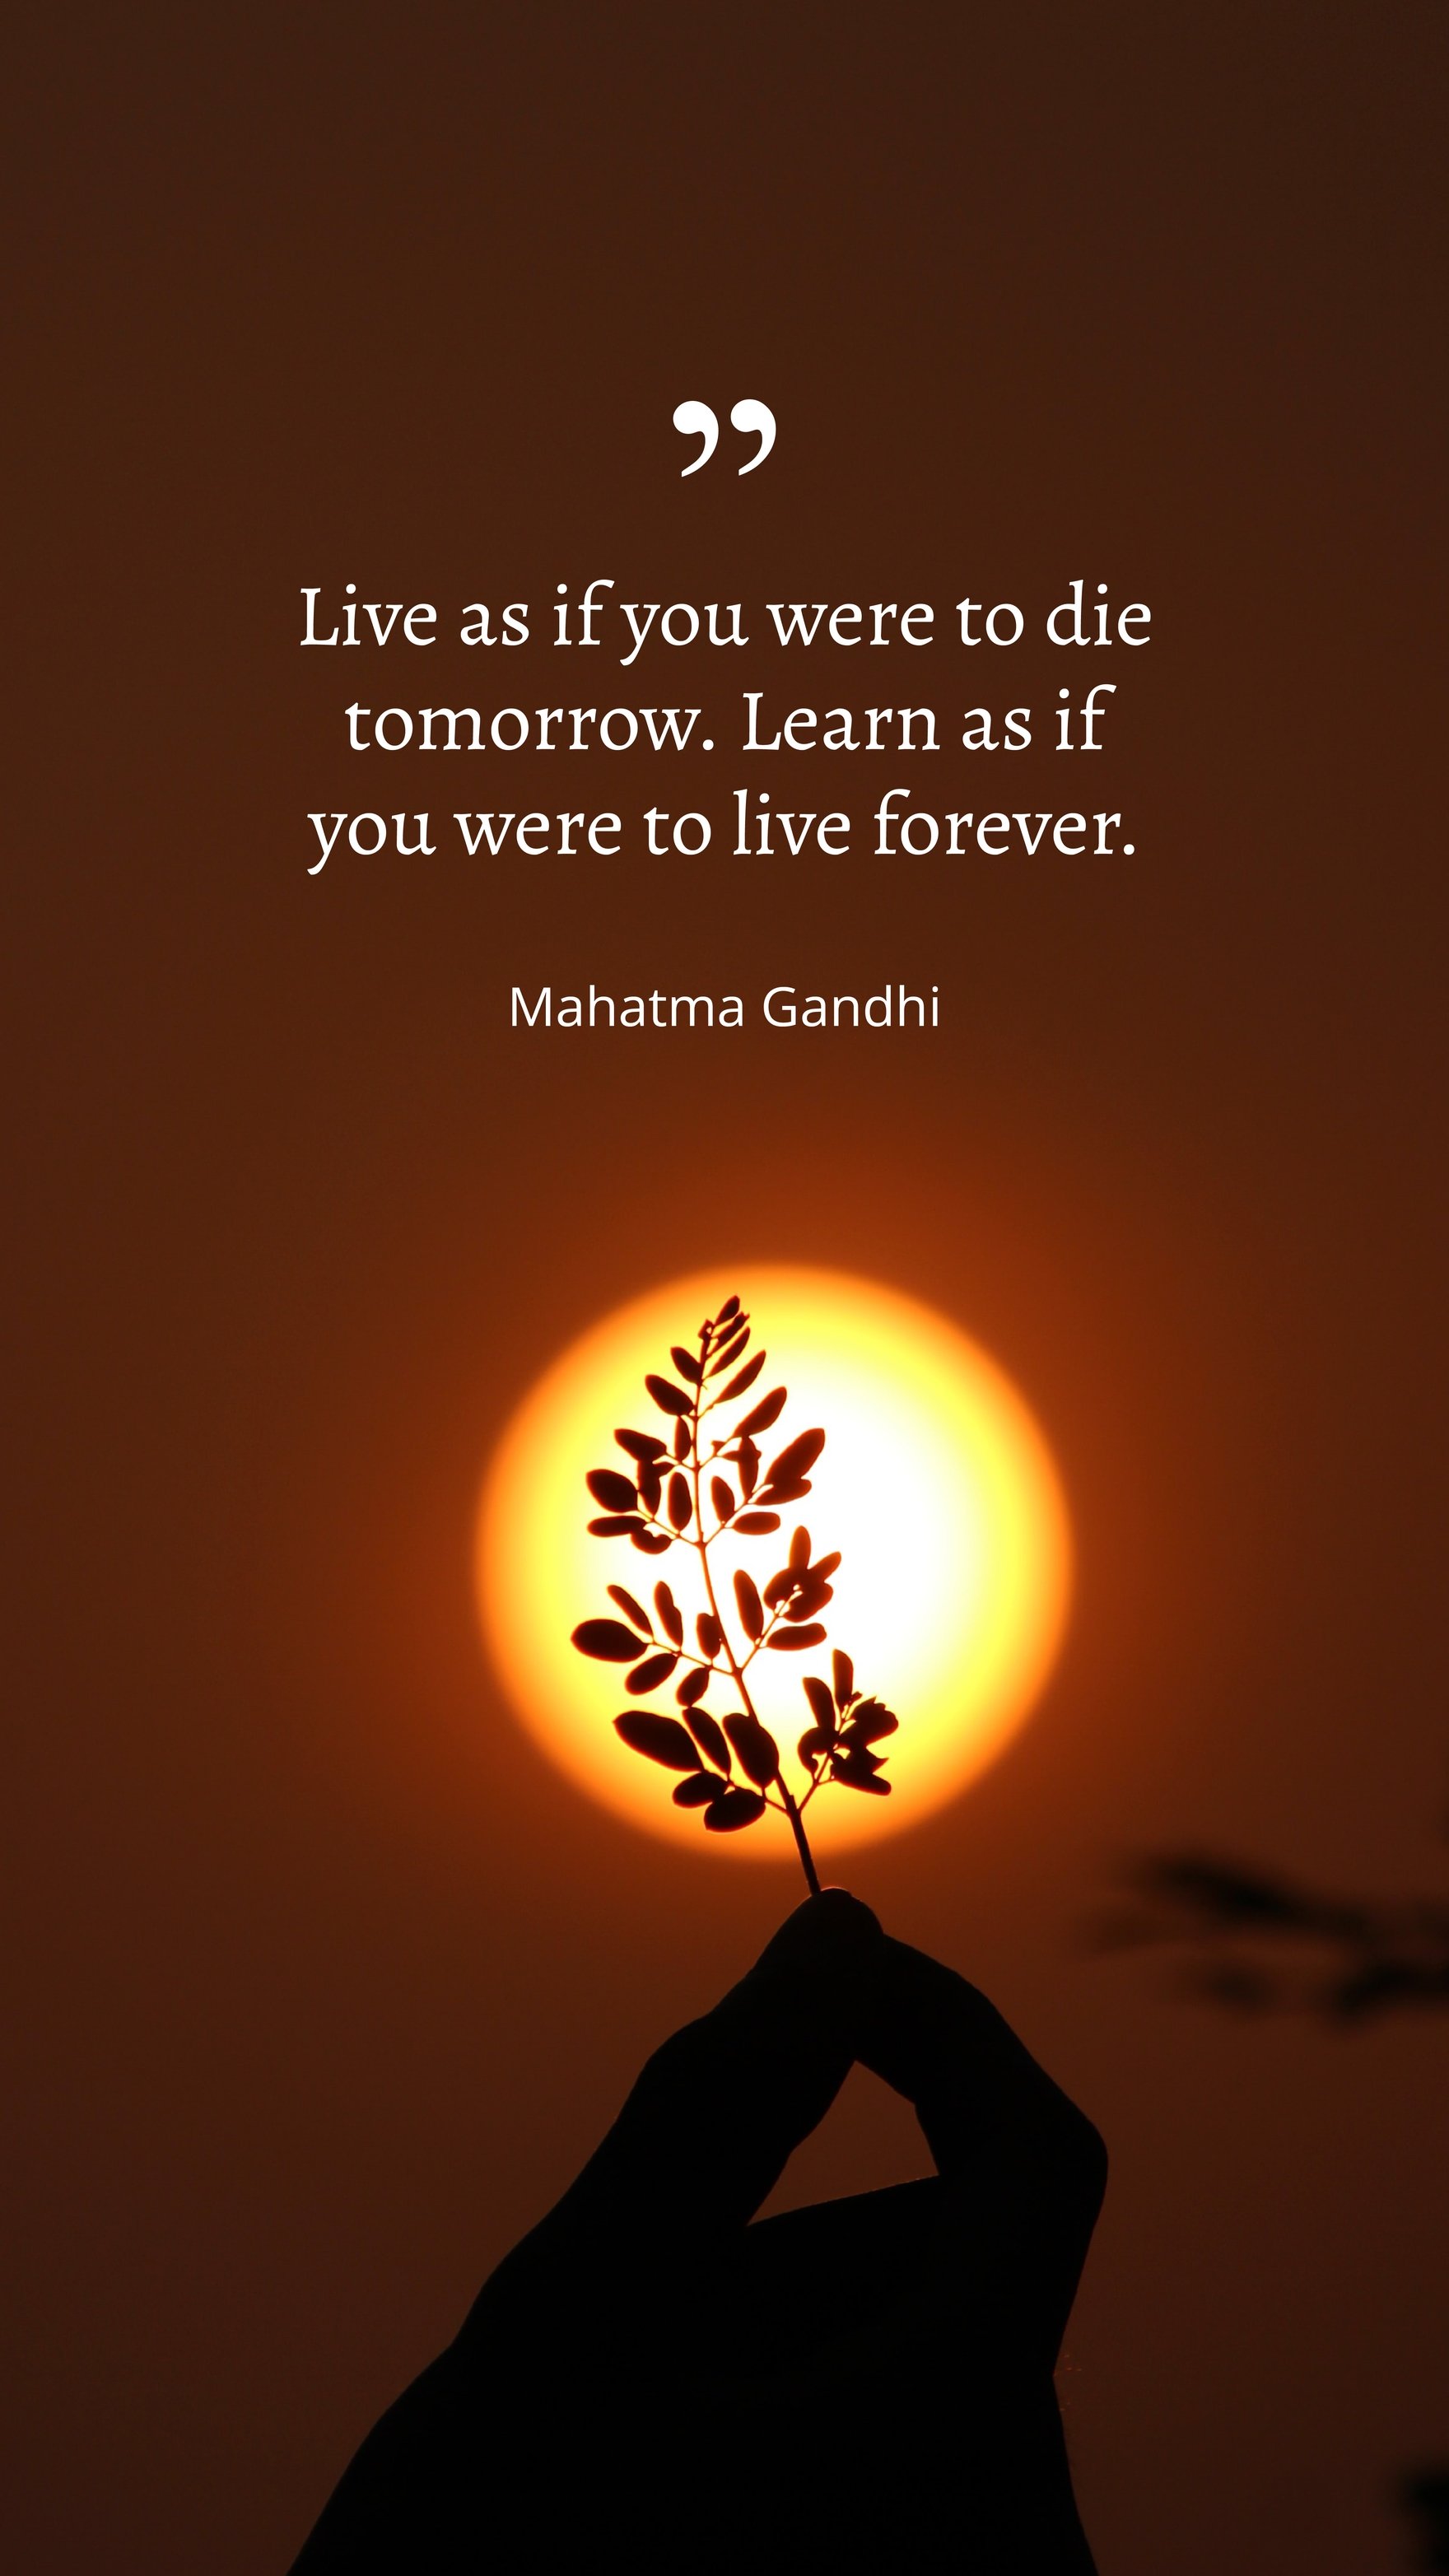 Mahatma Gandhi - Live as if you were to die tomorrow. Learn as if you were to live forever